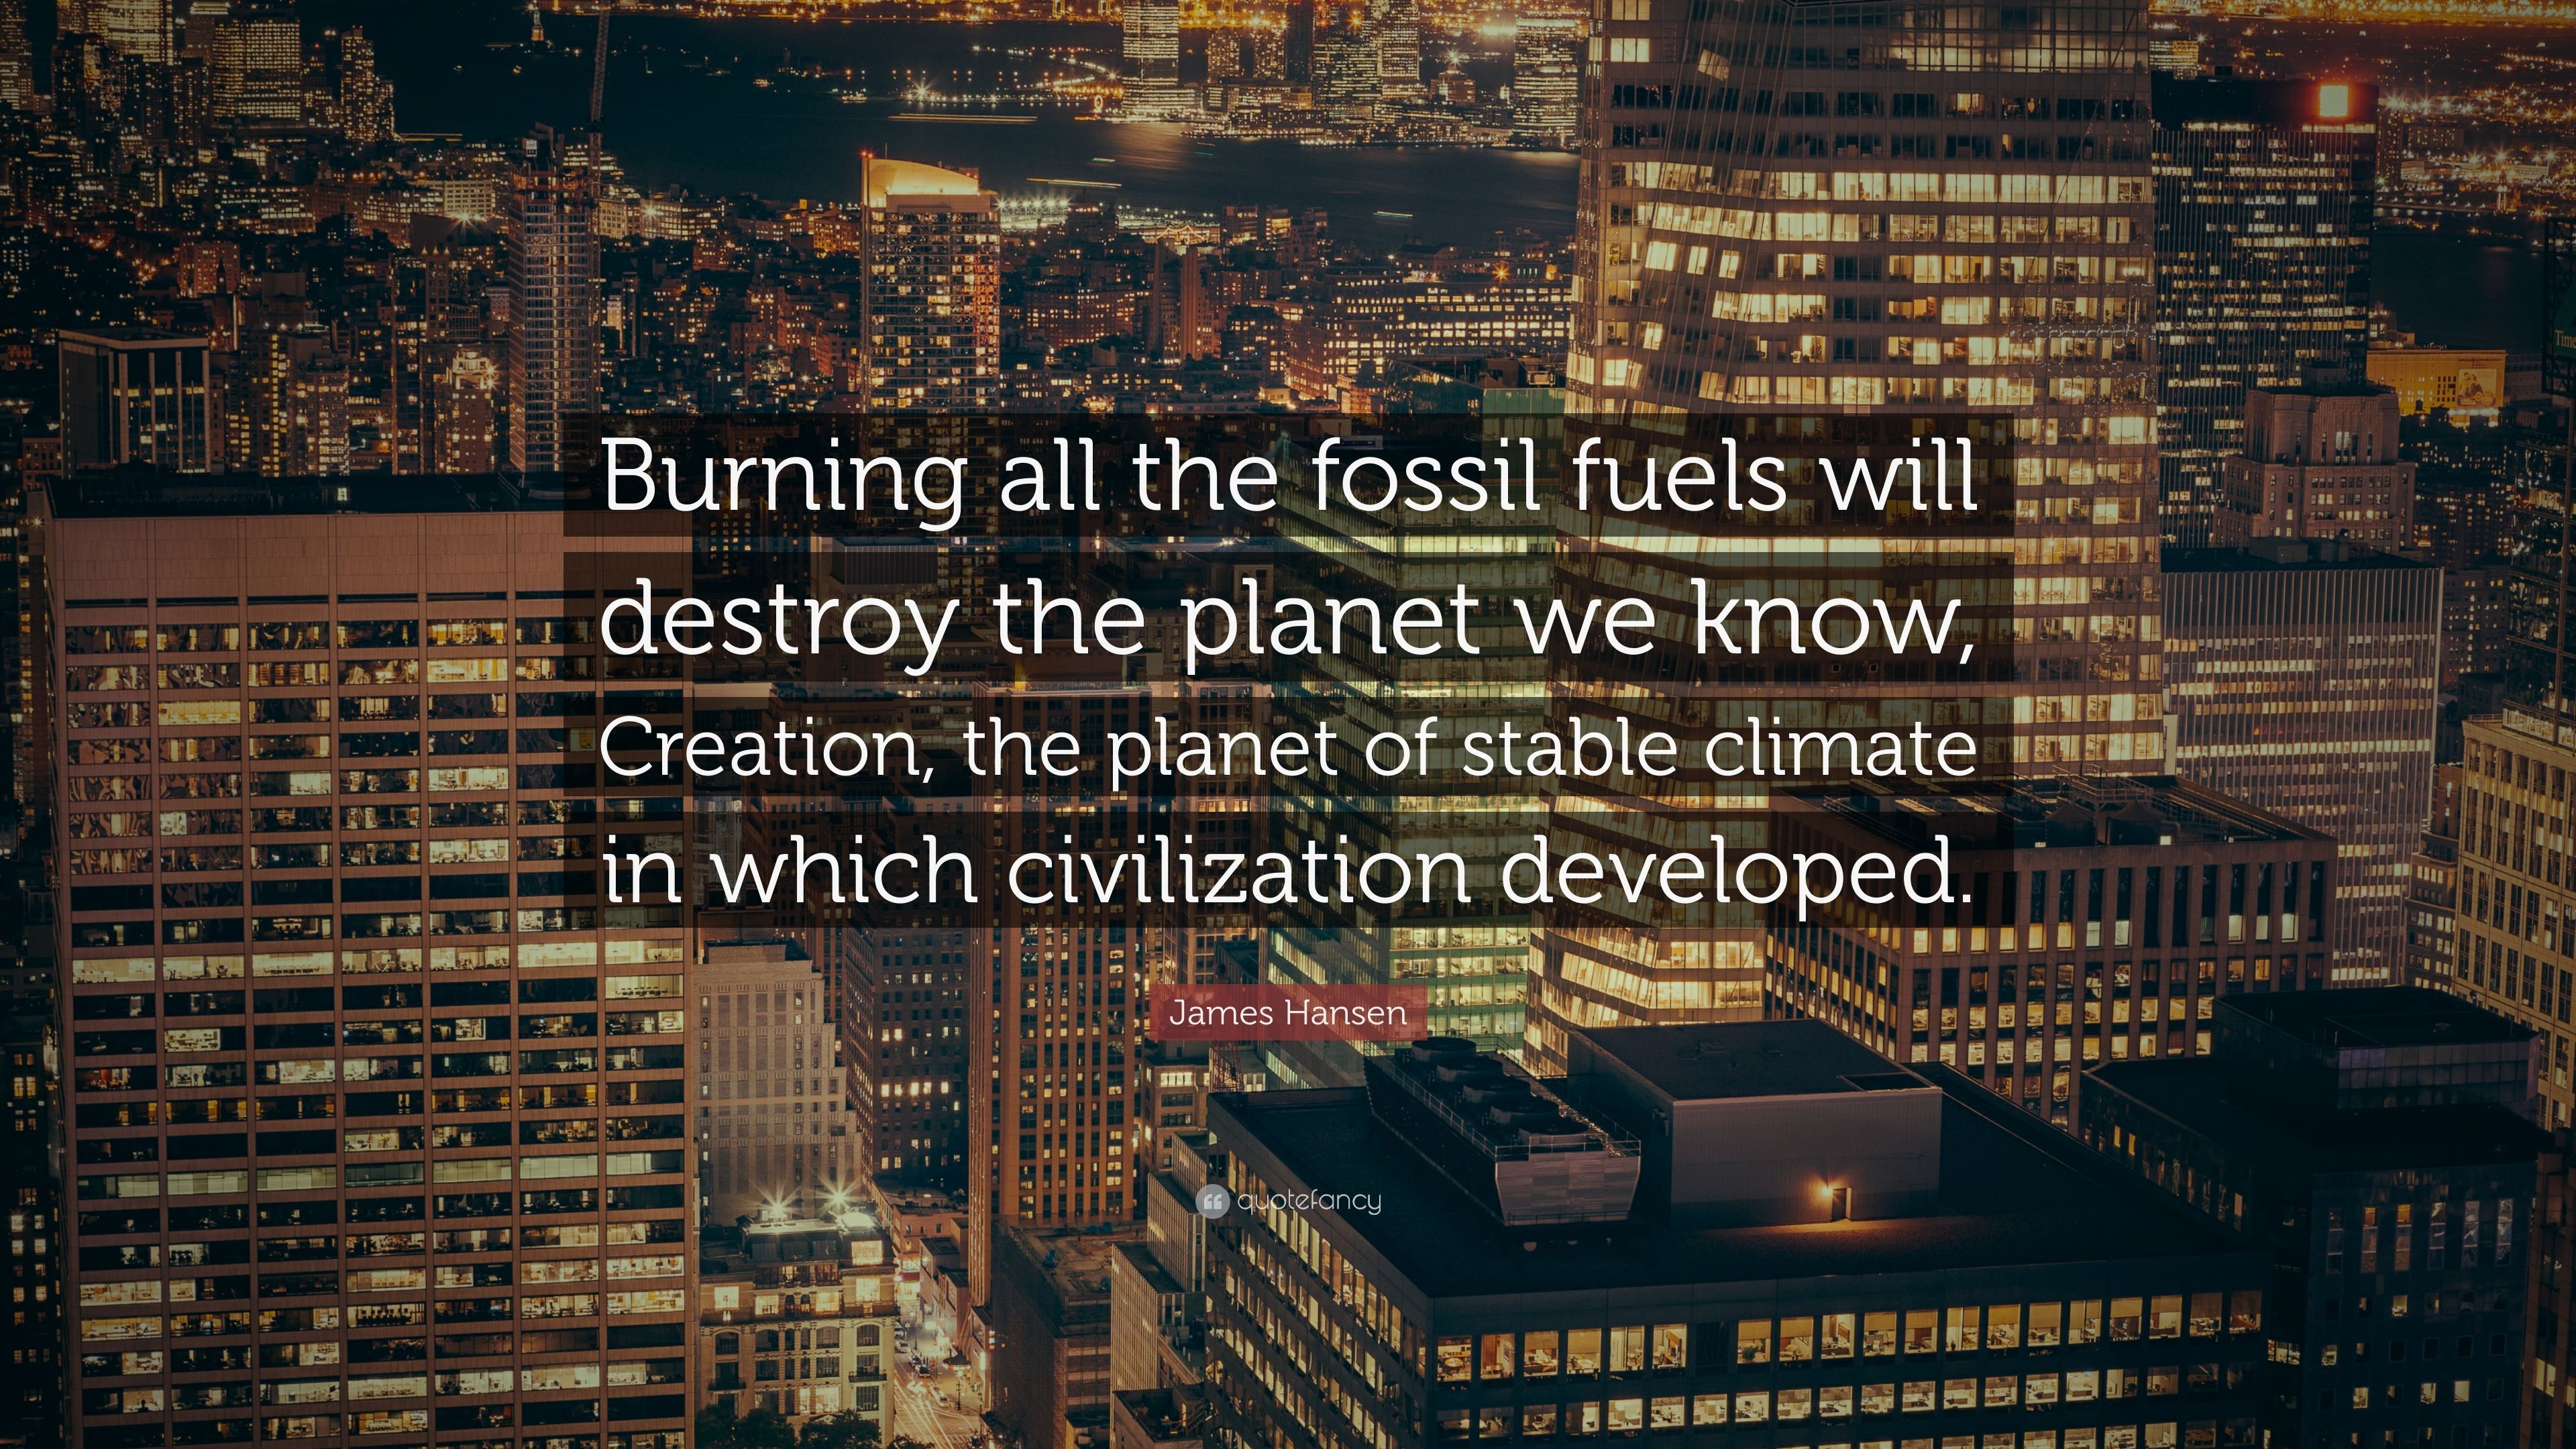 James Hansen Quote: “Burning all the fossil fuels will destroy